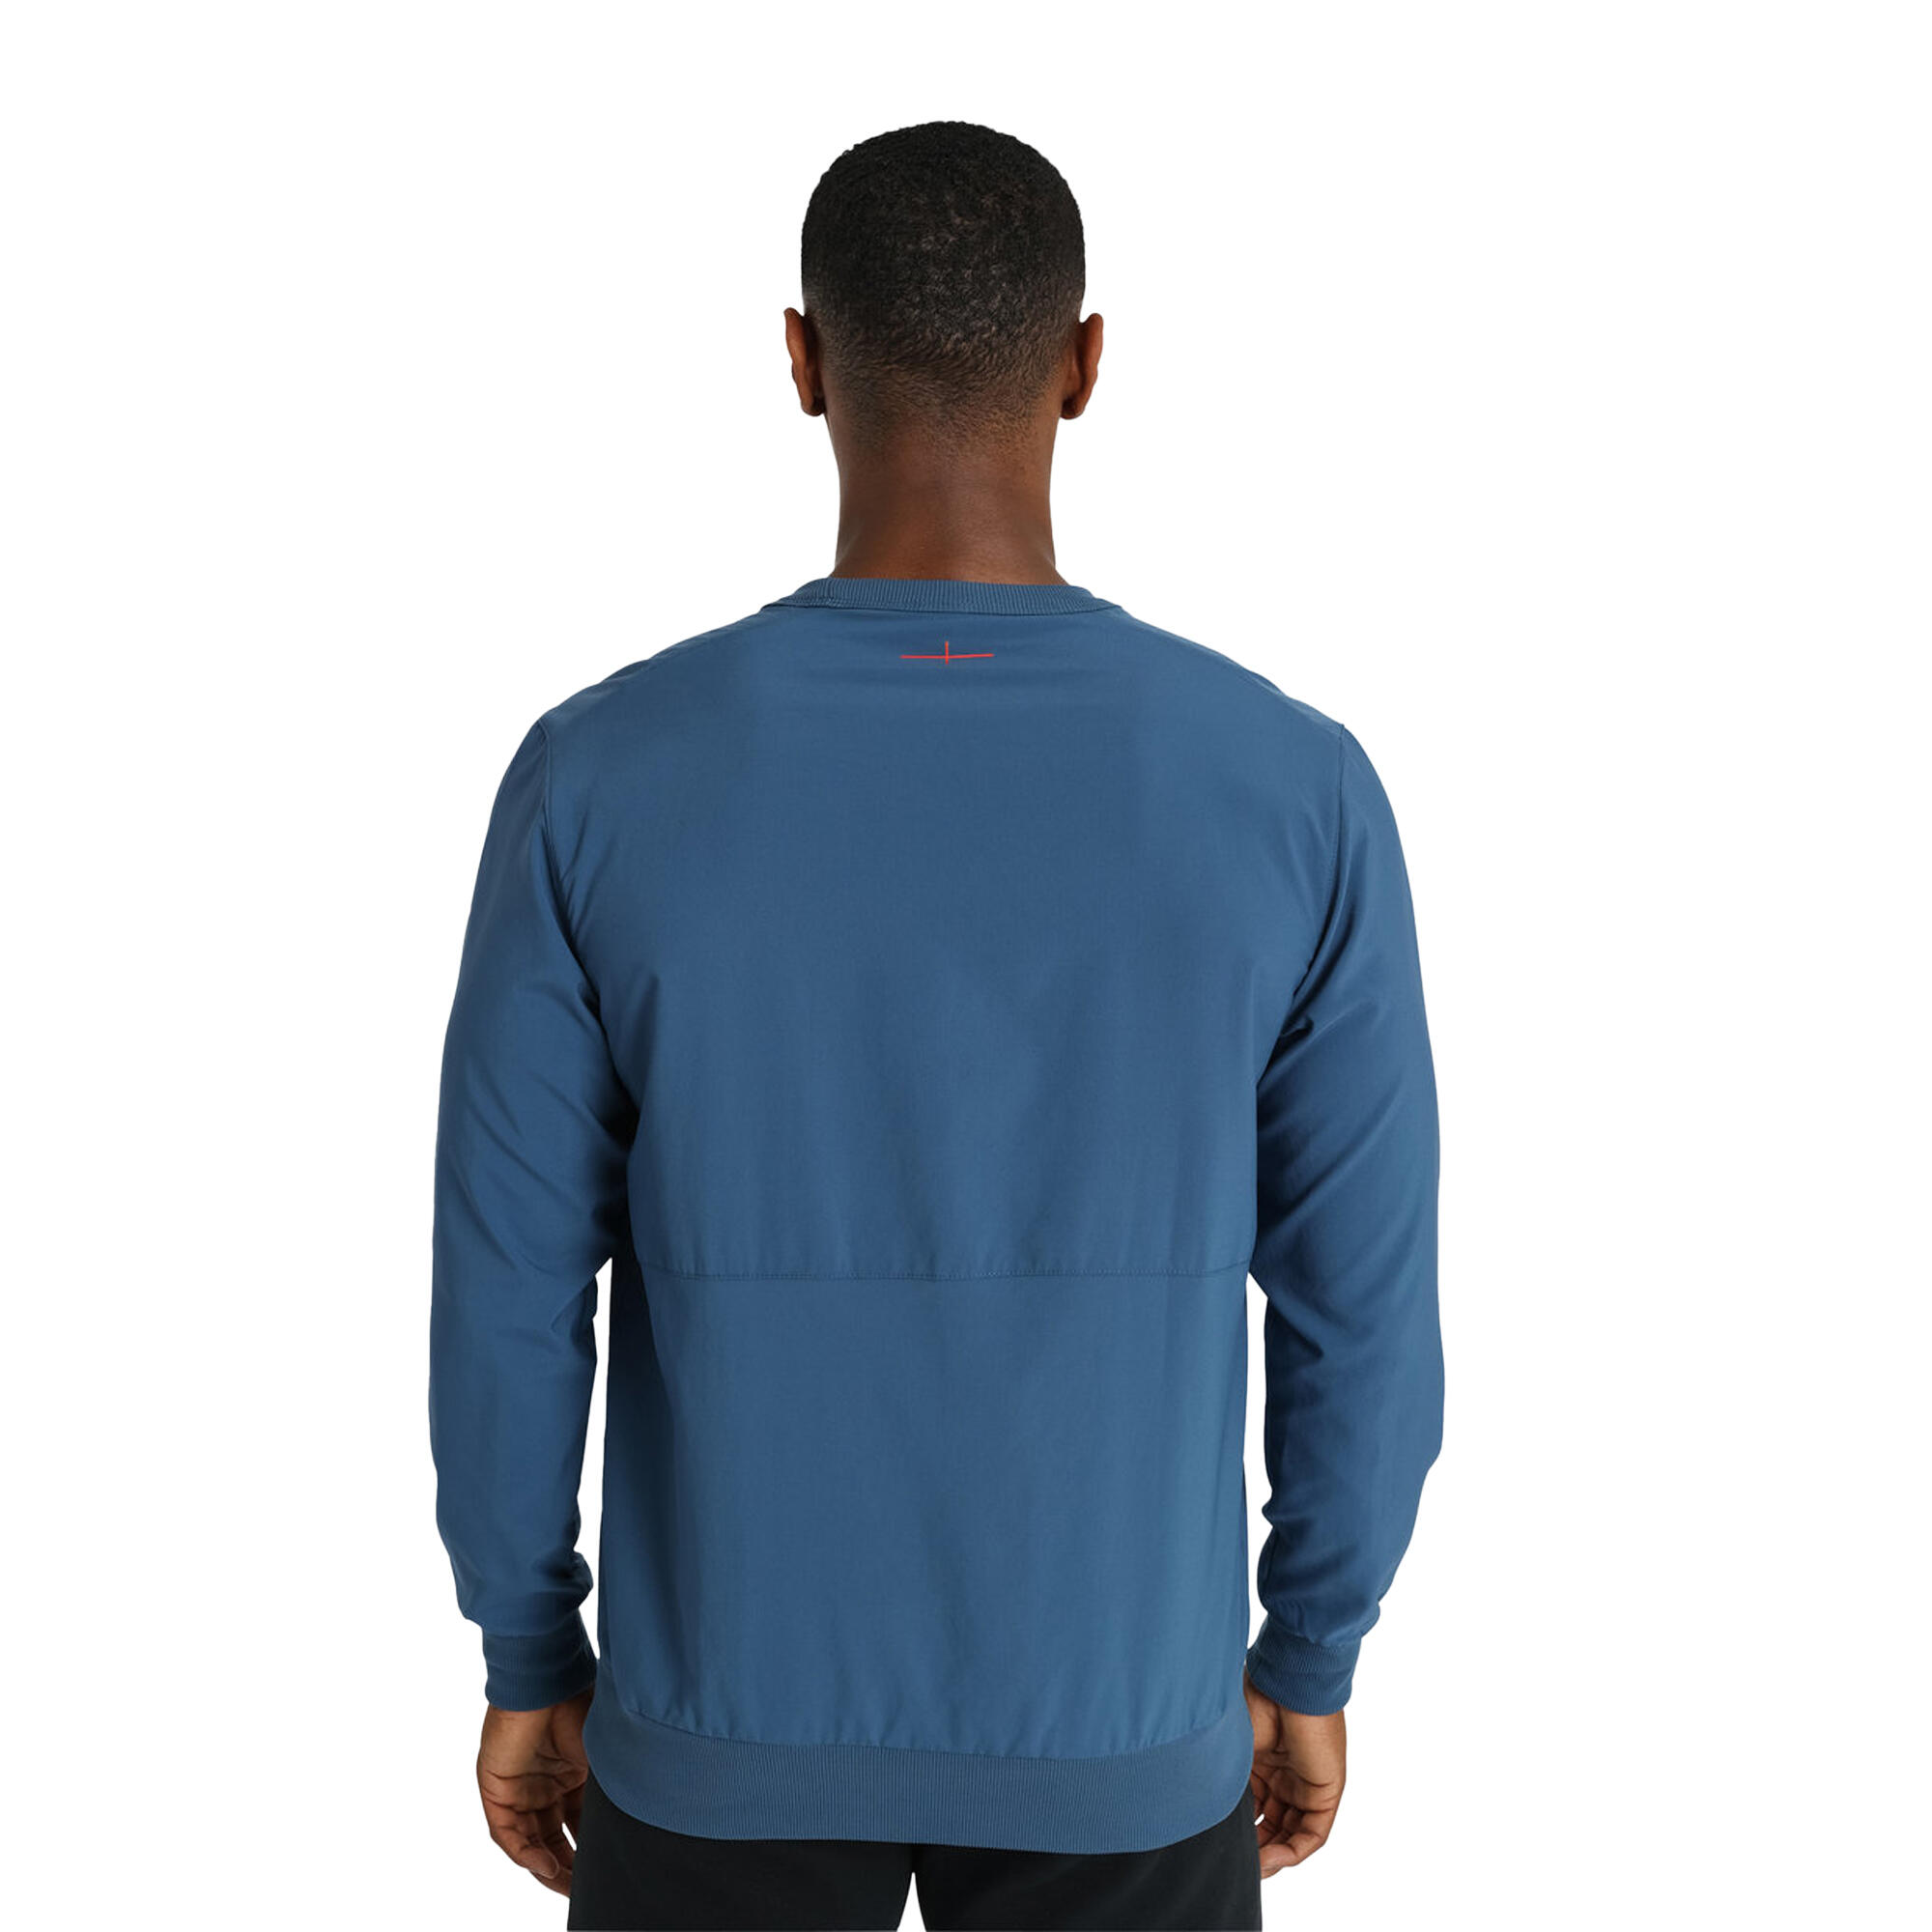 England Rugby Mens 22/23 Woven Sweatshirt (Ensign Blue) 4/4